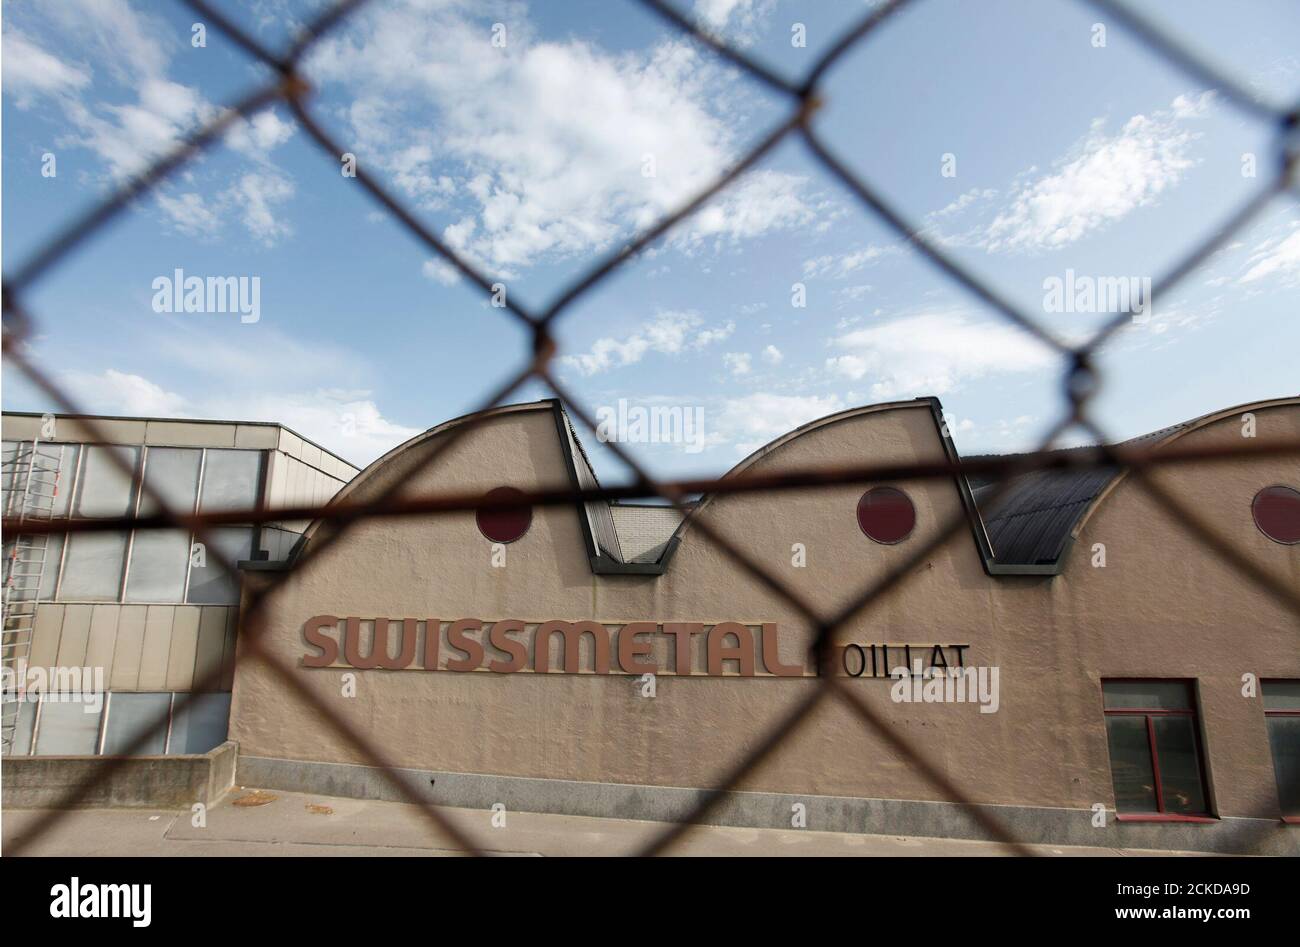 The logo of SWISSMETAL is seen outside the Swissmetal plant in Reconvilier August 23, 2011. REUTERS/Pascal Lauener (SWITZERLAND - Tags: EMPLOYMENT BUSINESS) Stock Photo